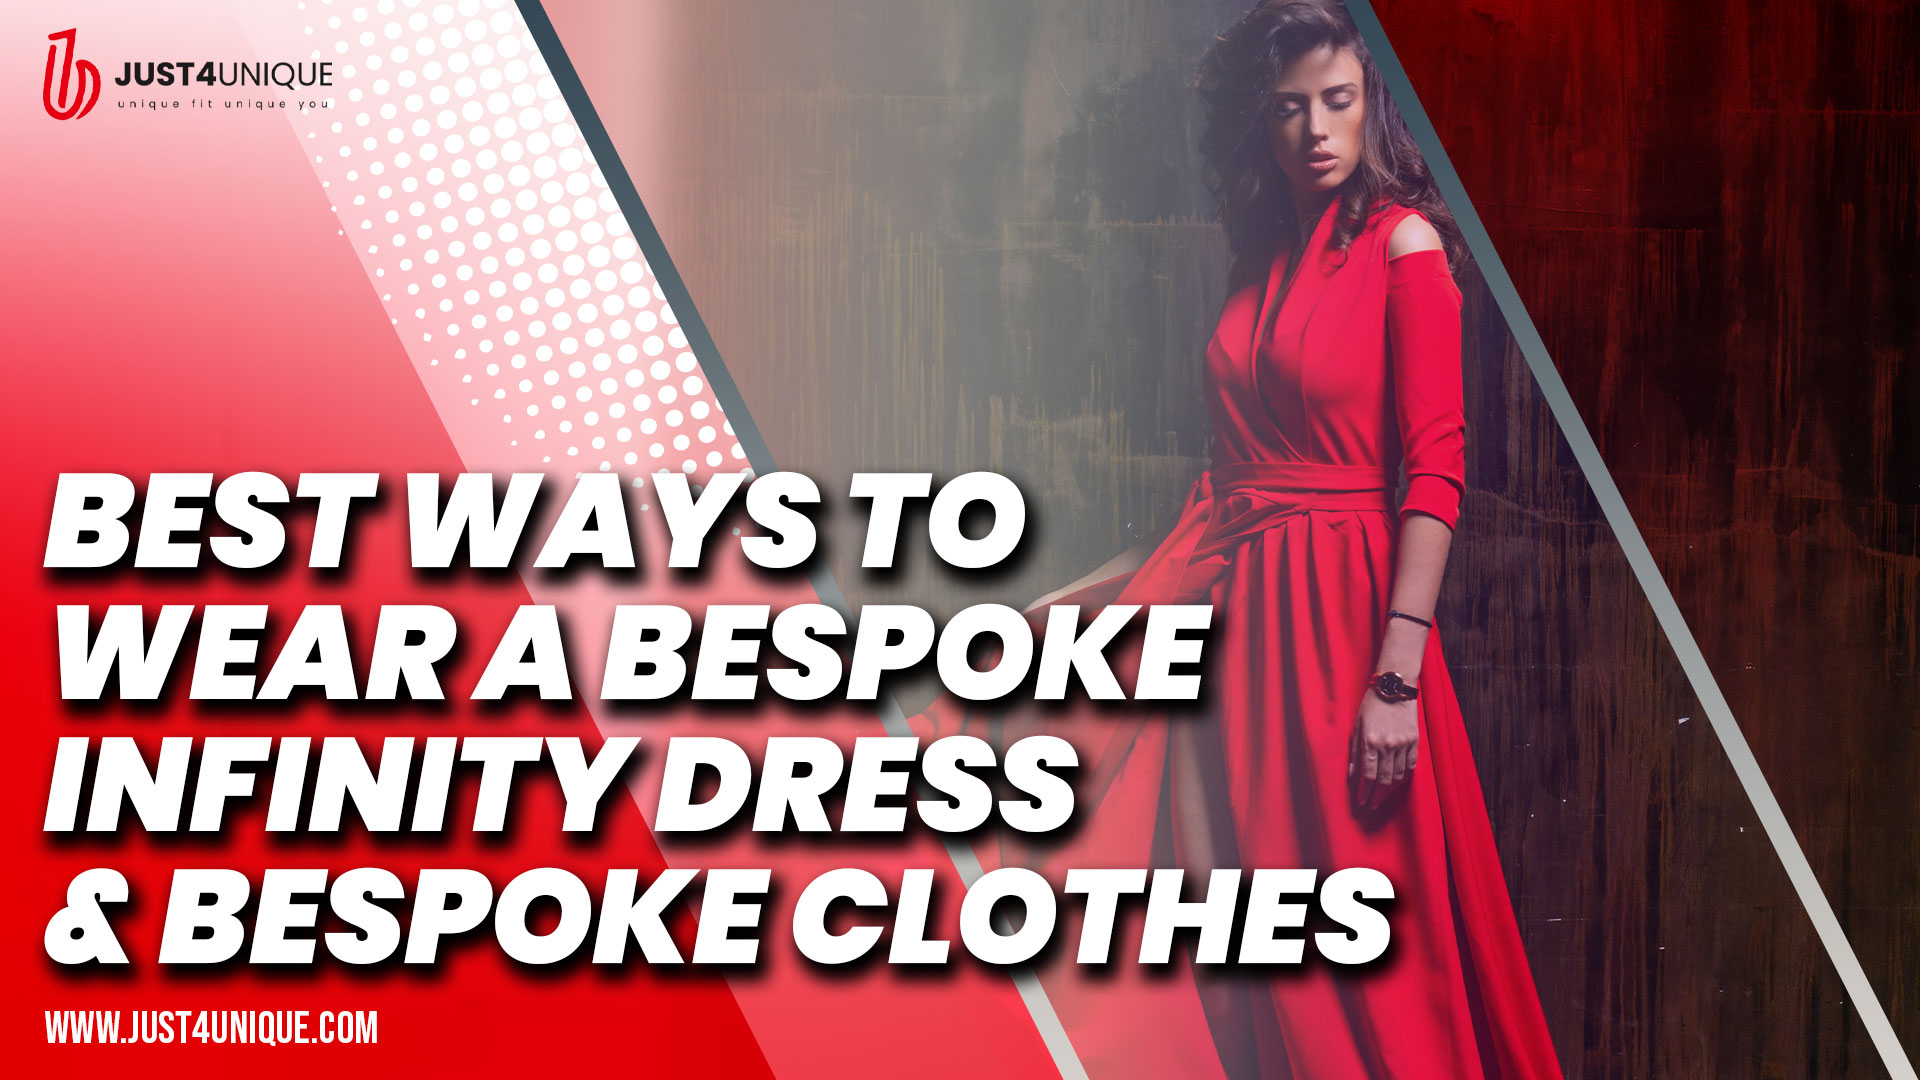 Best Ways to Wear a Bespoke Infinity Dress and Bespoke Clothes